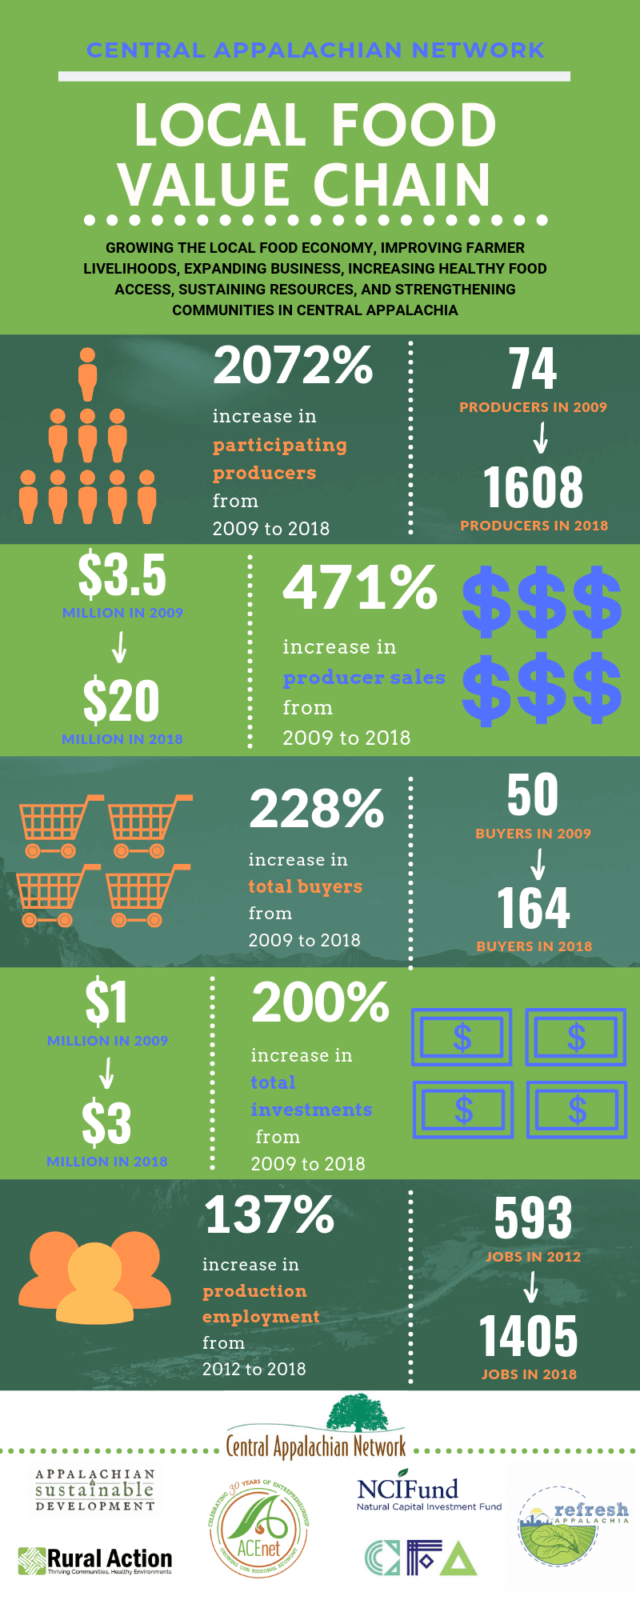 2018 Local Food System Impacts - $20 Million in Producer Sales ...